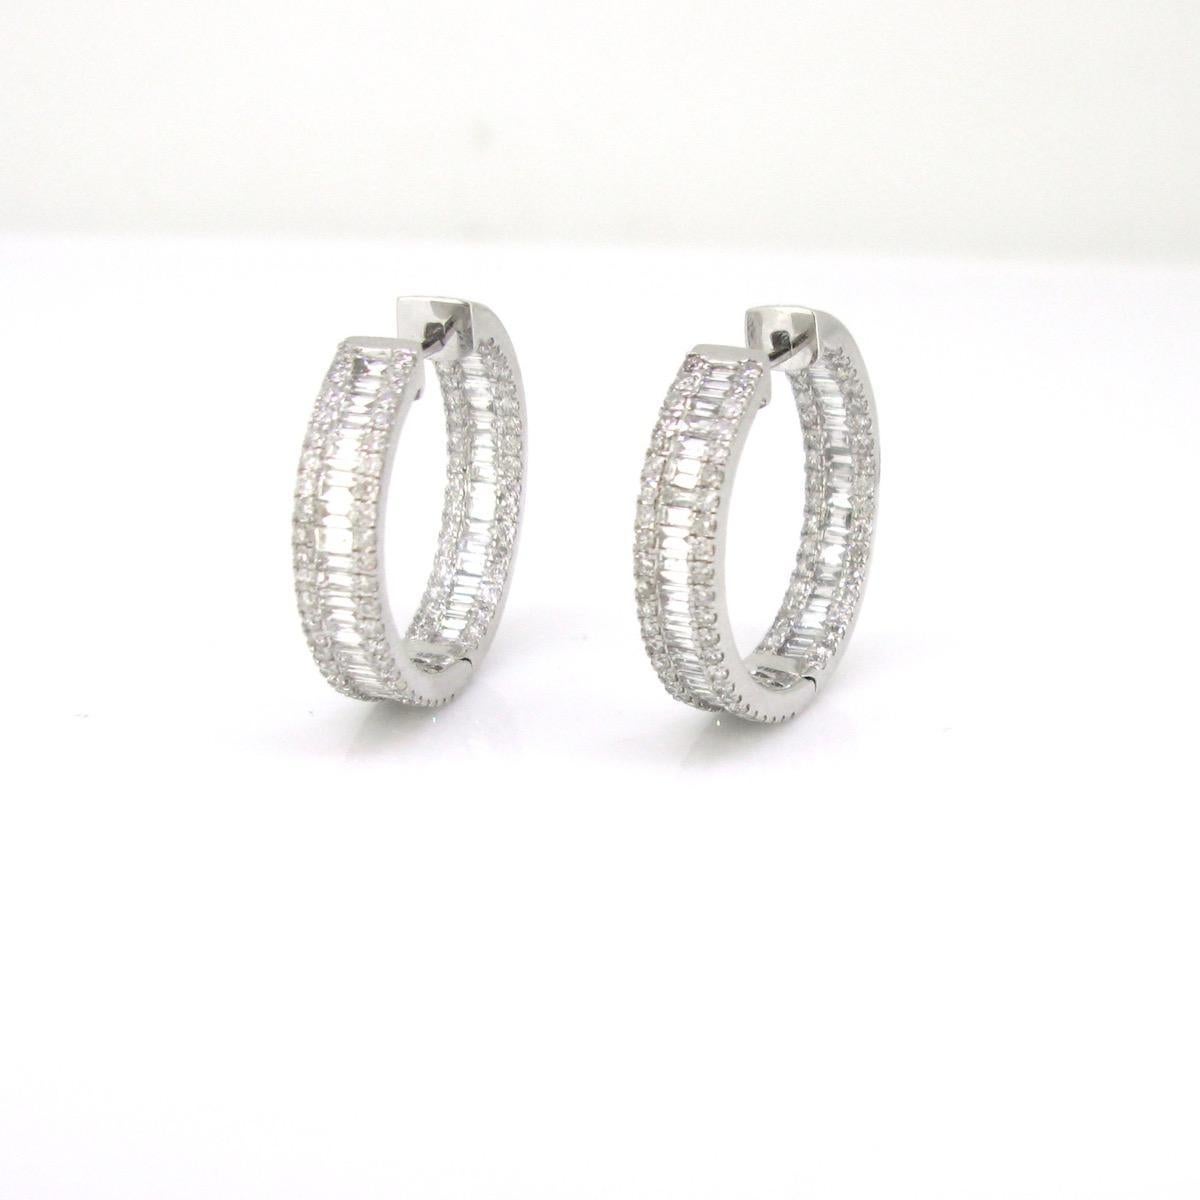  3.57ct Diamonds White Gold Hoop Earrings In Excellent Condition For Sale In London, GB